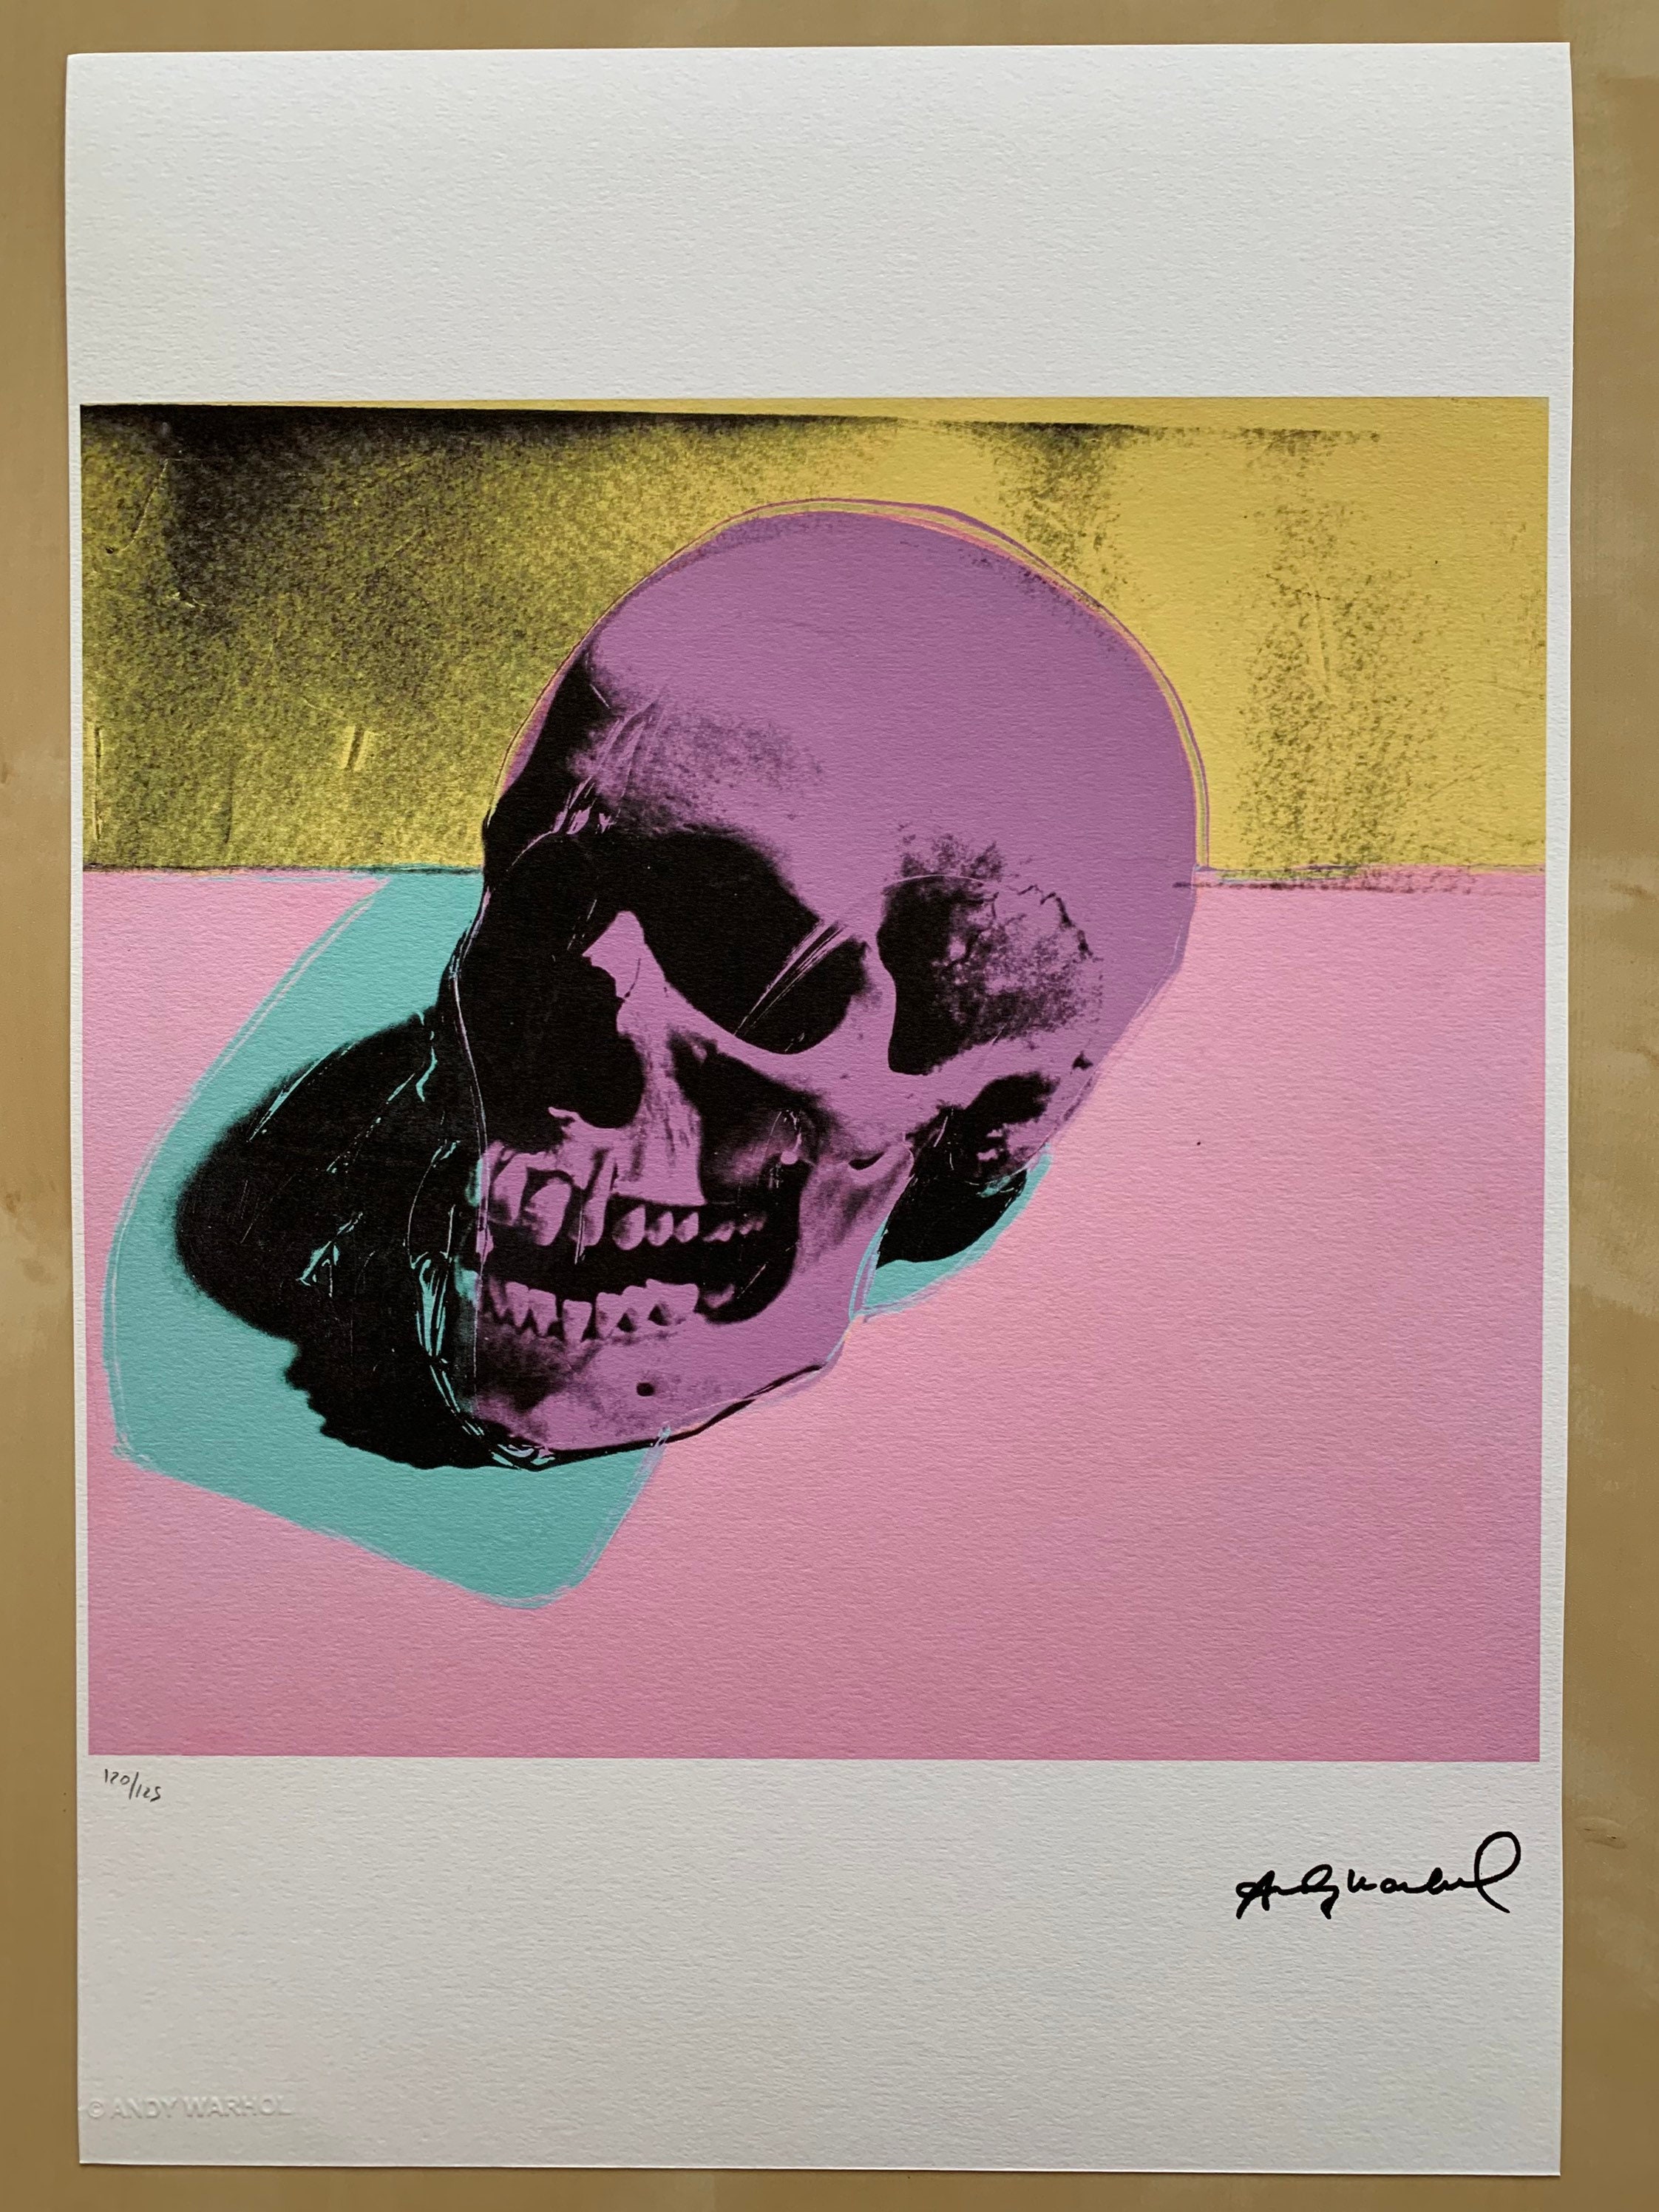 Andy Warhol Skull Foundation Edition Lithography 